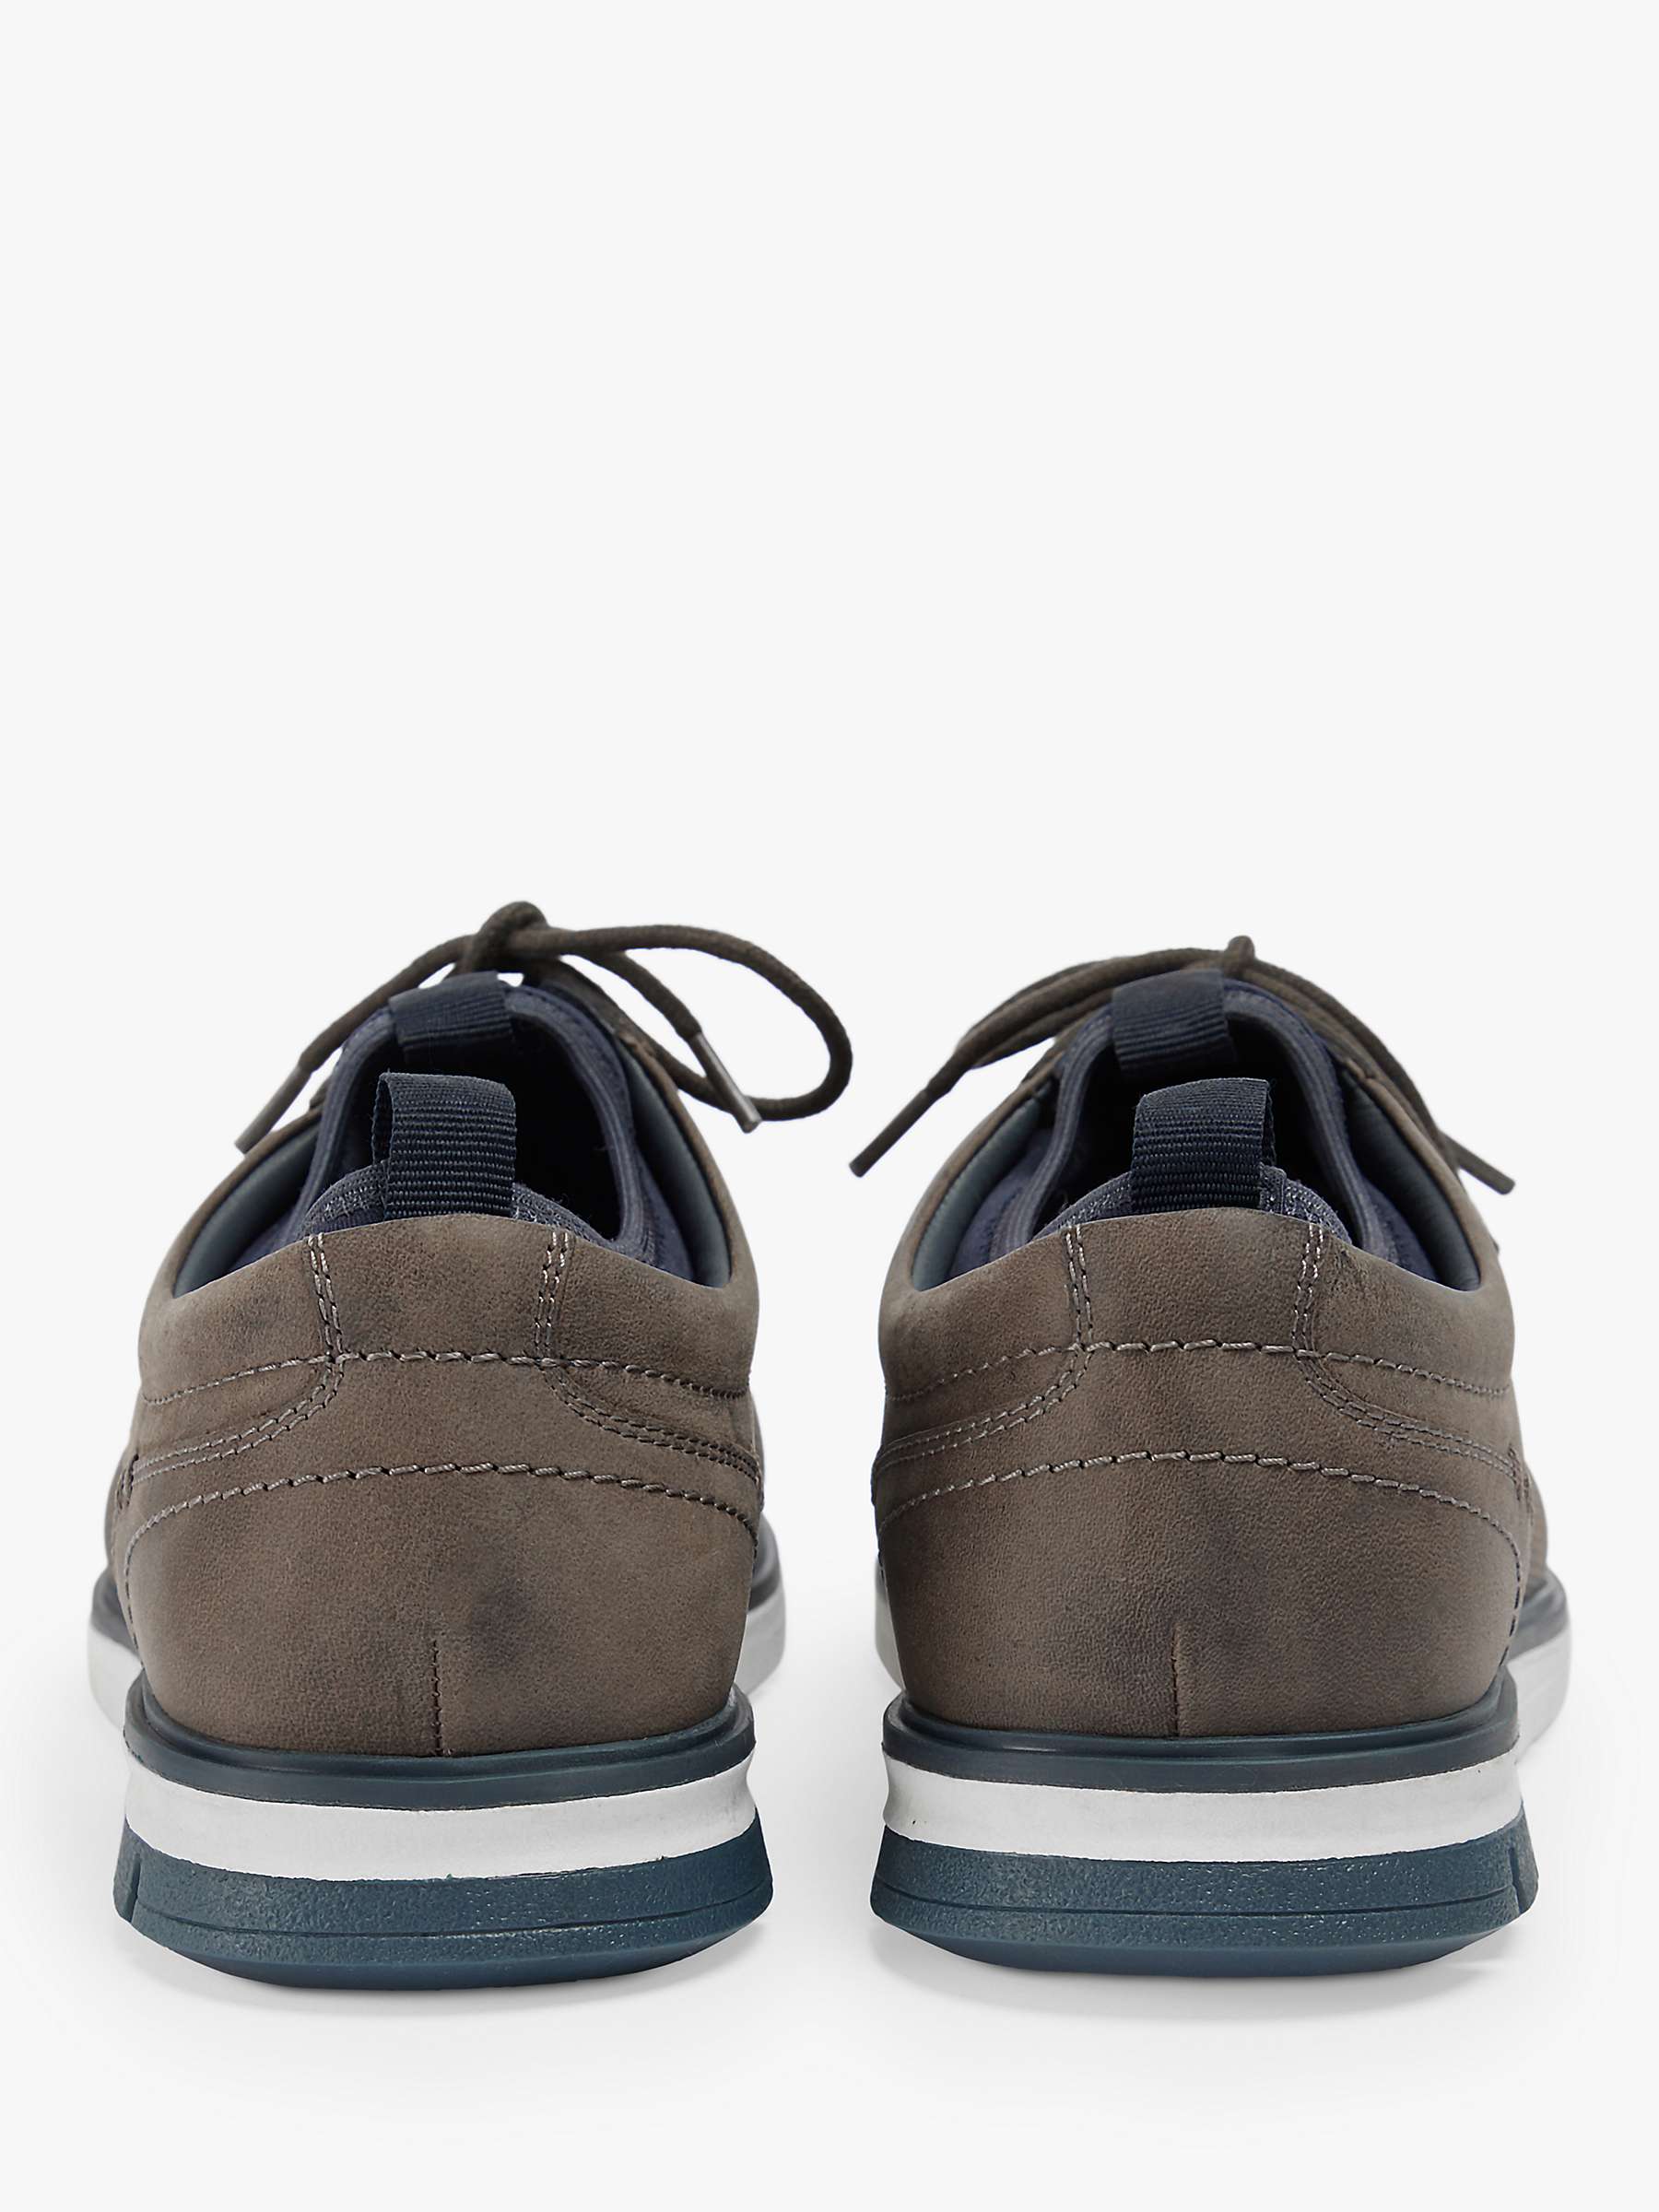 Buy Pod Murphy Essential Trainers, Grey Online at johnlewis.com